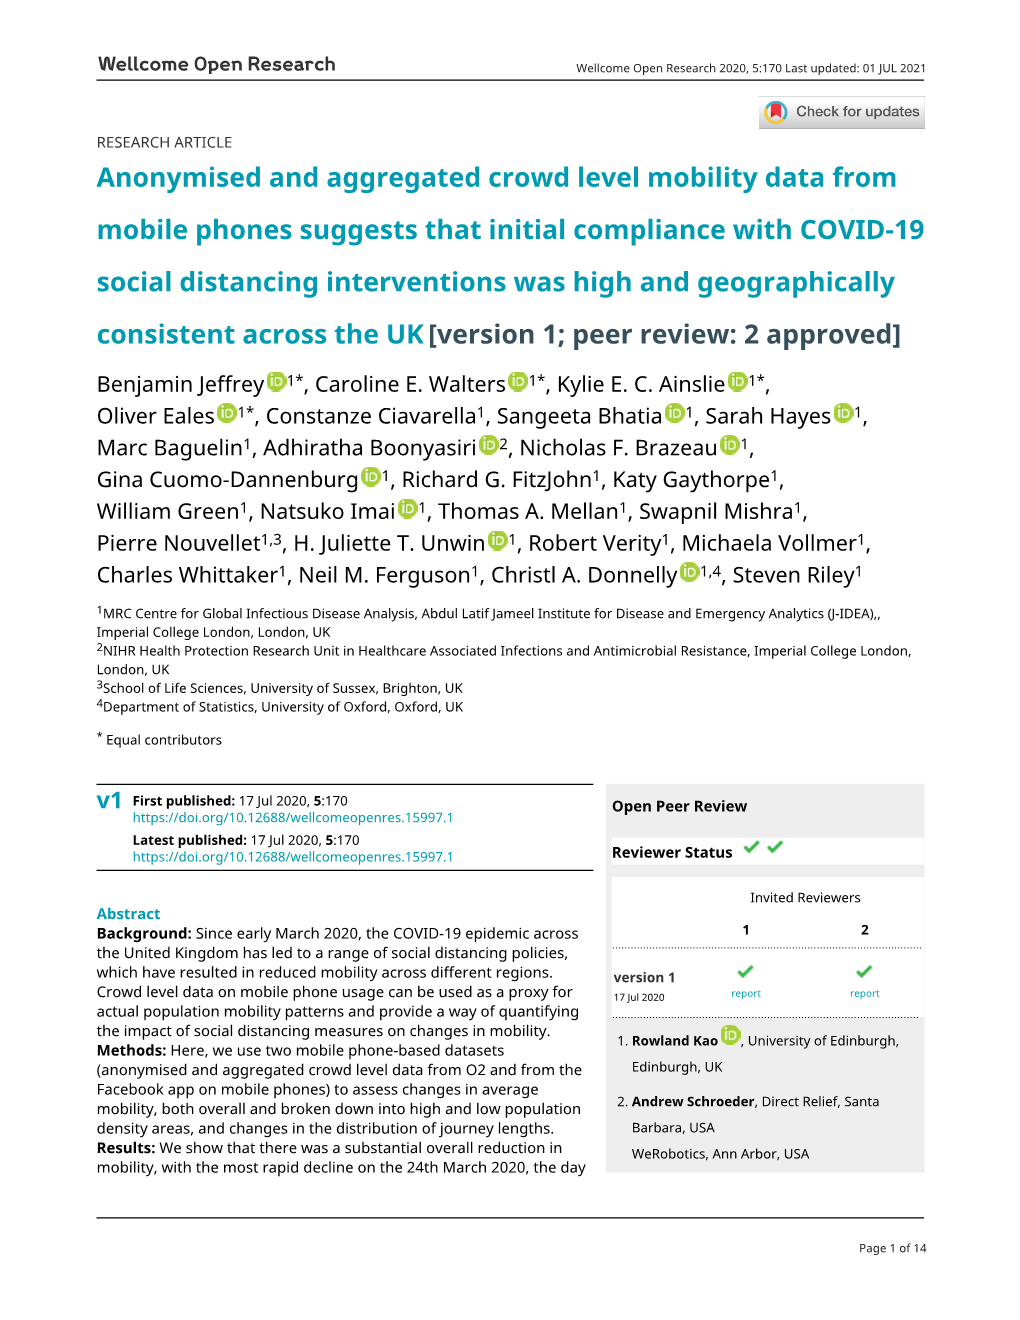 Anonymised and Aggregated Crowd Level Mobility Data From